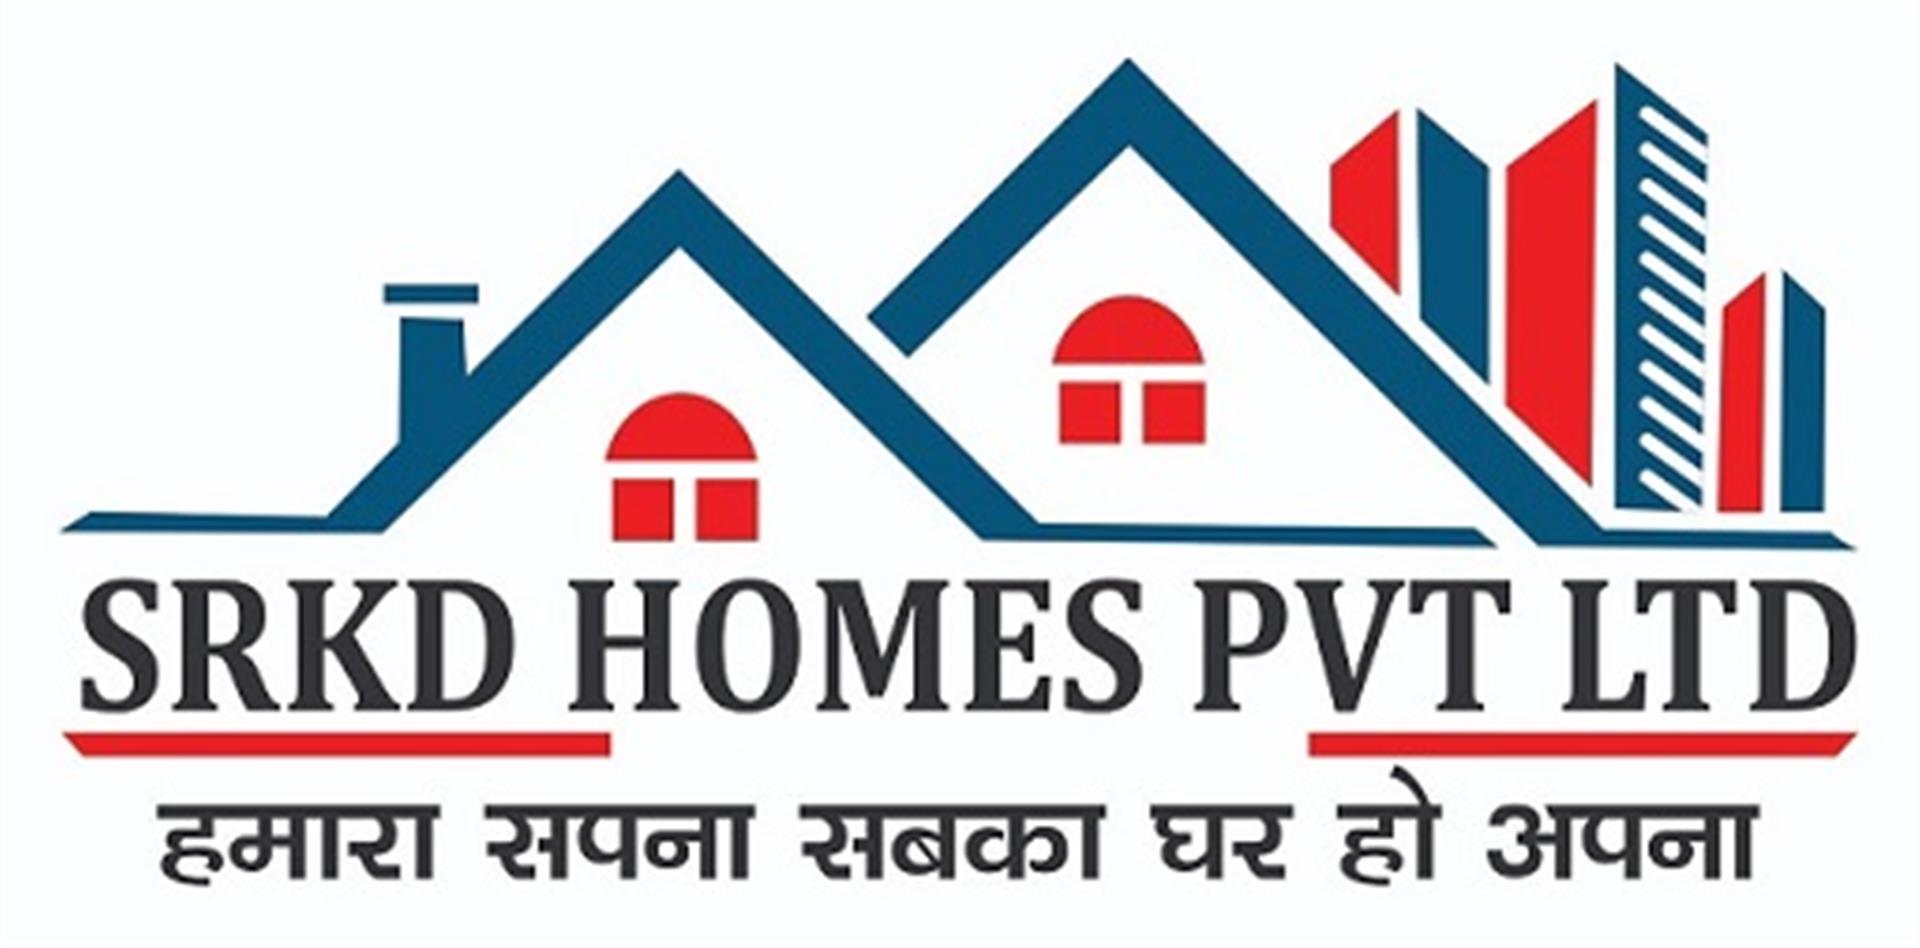 defence-metro-city-kanpur-road-lucknow-plot-land